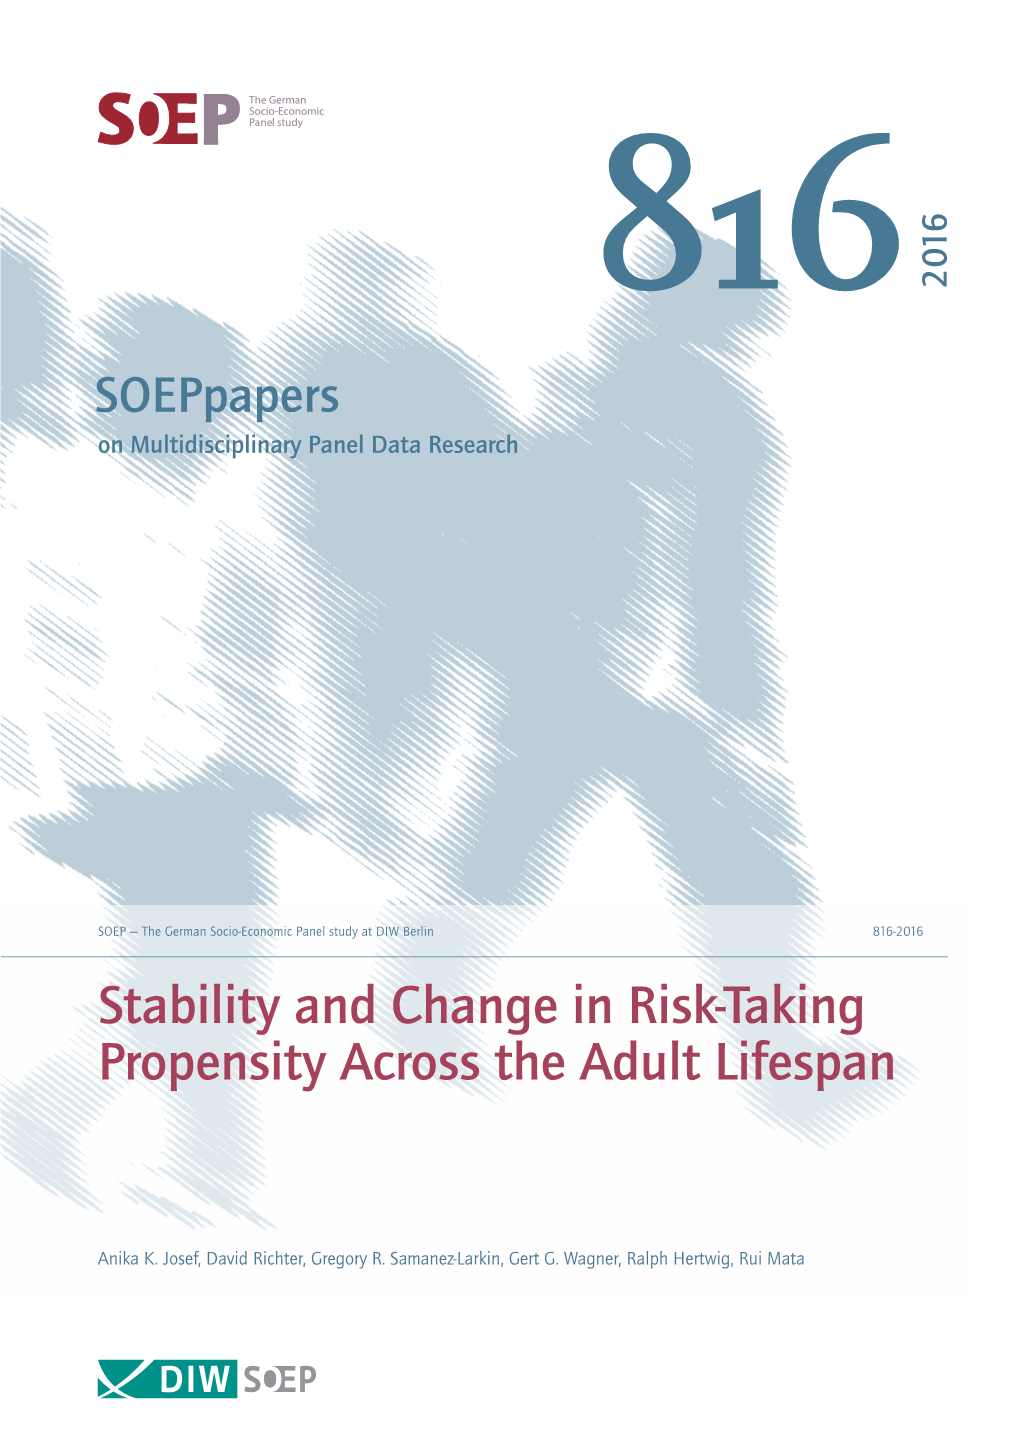 Stability and Change in Risk-Taking Propensity Across the Adult Lifespan